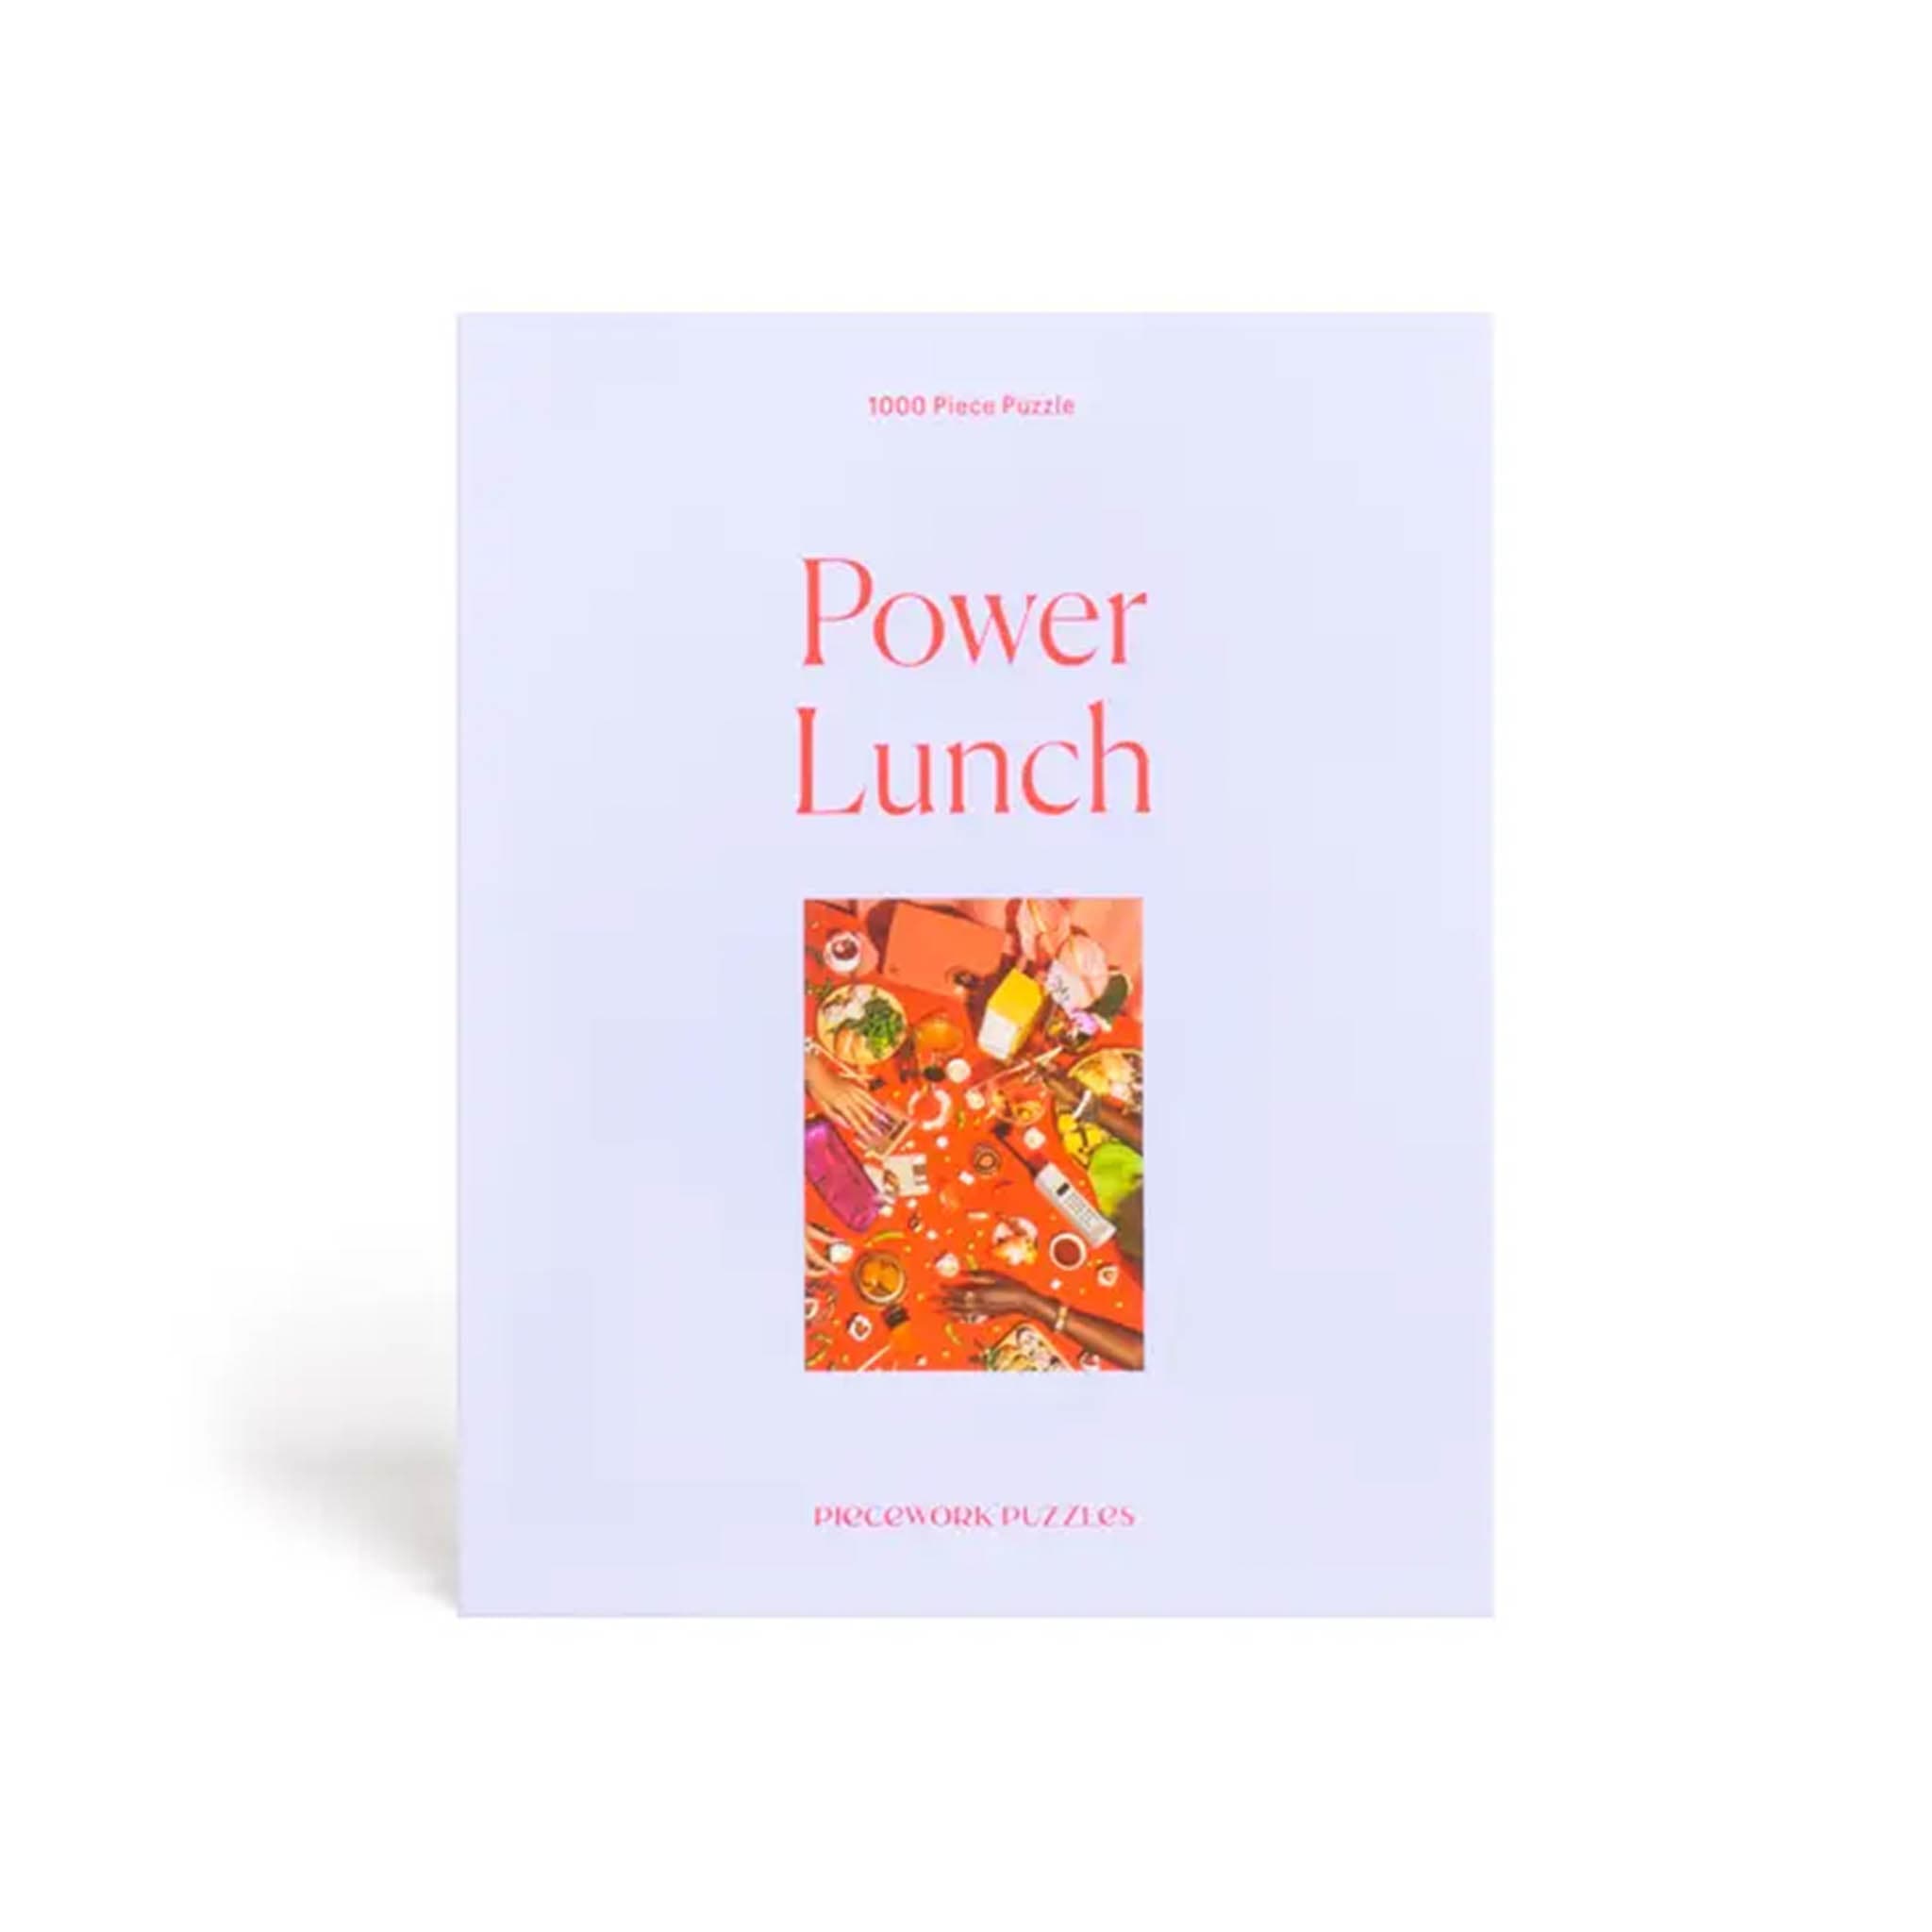 Piecework Puzzles Power Lunch, 1000 Pieces